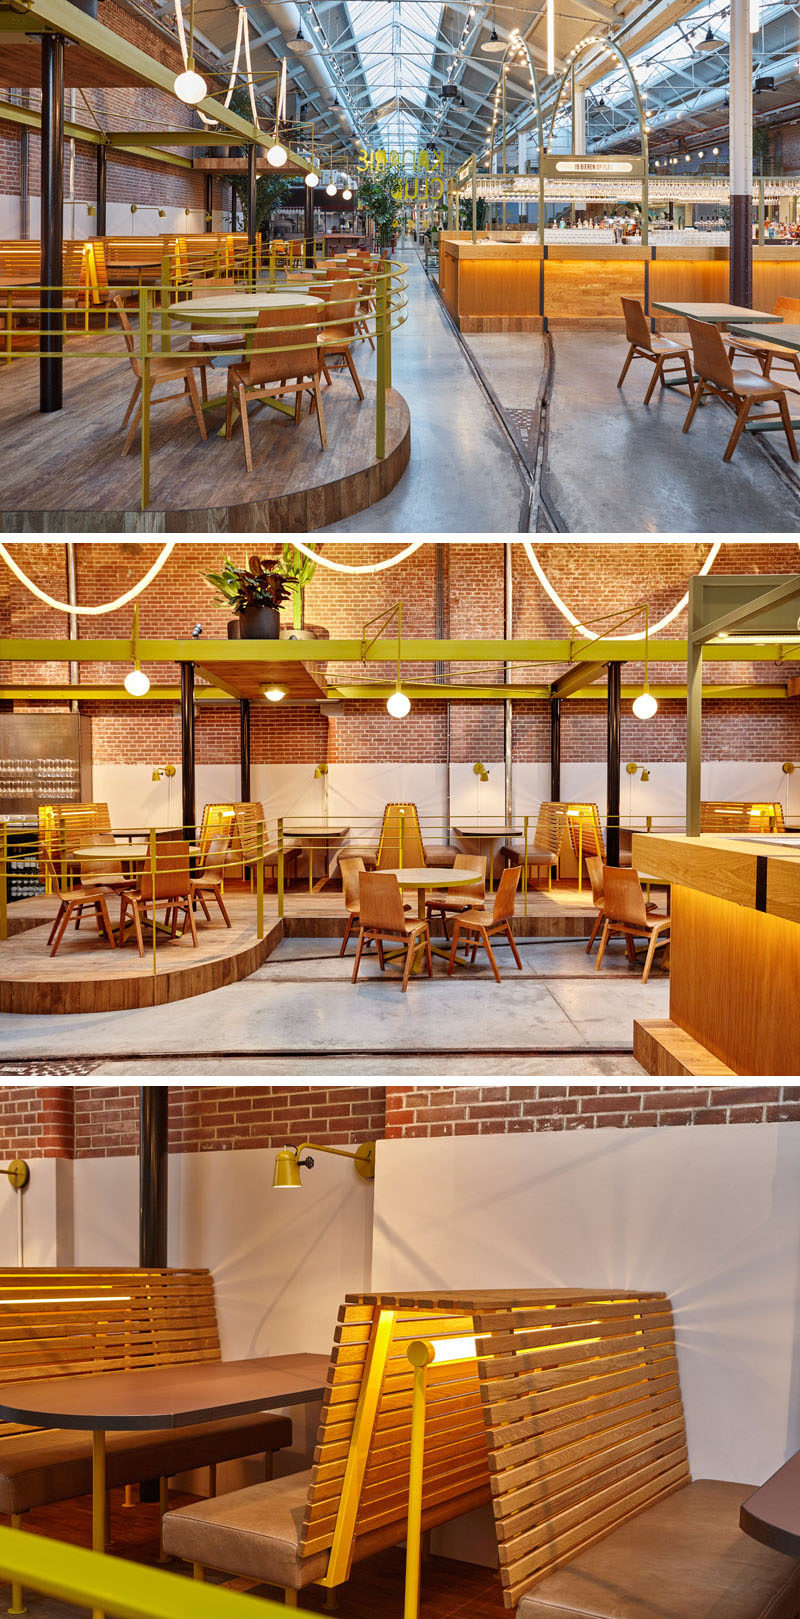 In this renovated tram depot that's now a restaurant, custom made furniture throughout resembles the vintage design of the old electric tram seats.